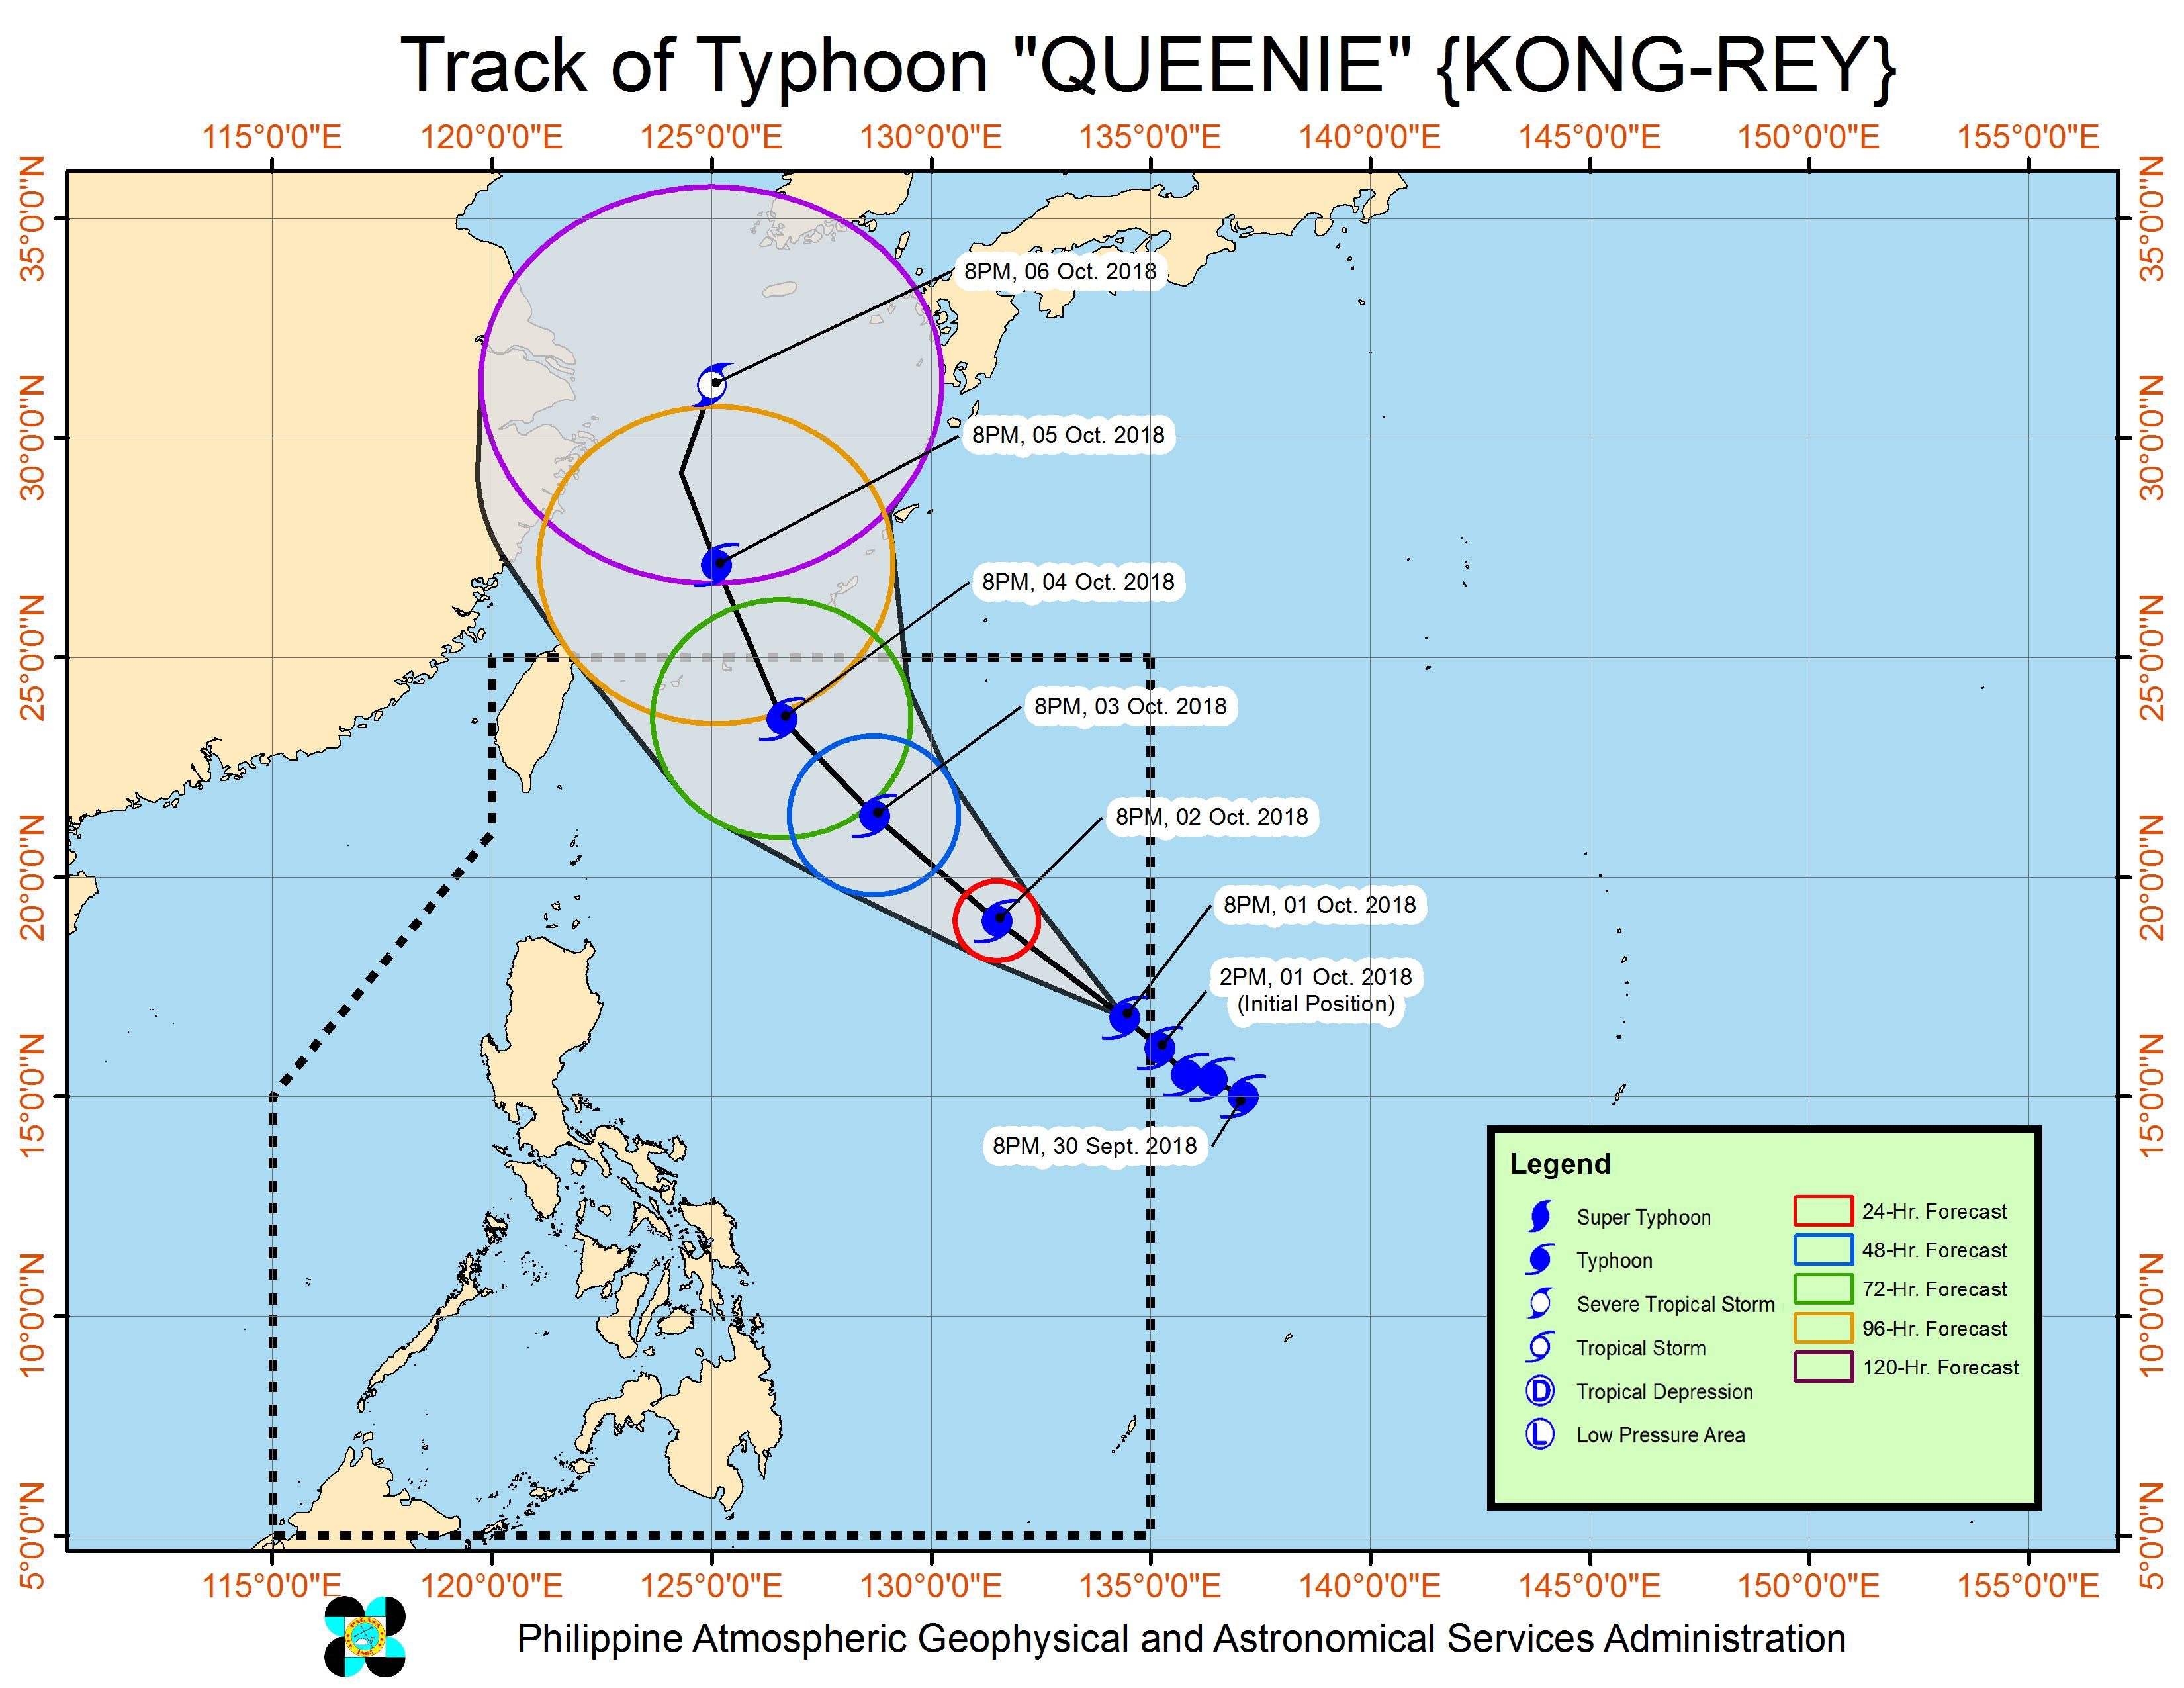 Forecast track of Typhoon Queenie (Kong-rey) as of October 1, 2018, 11 pm. Image from PAGASA 